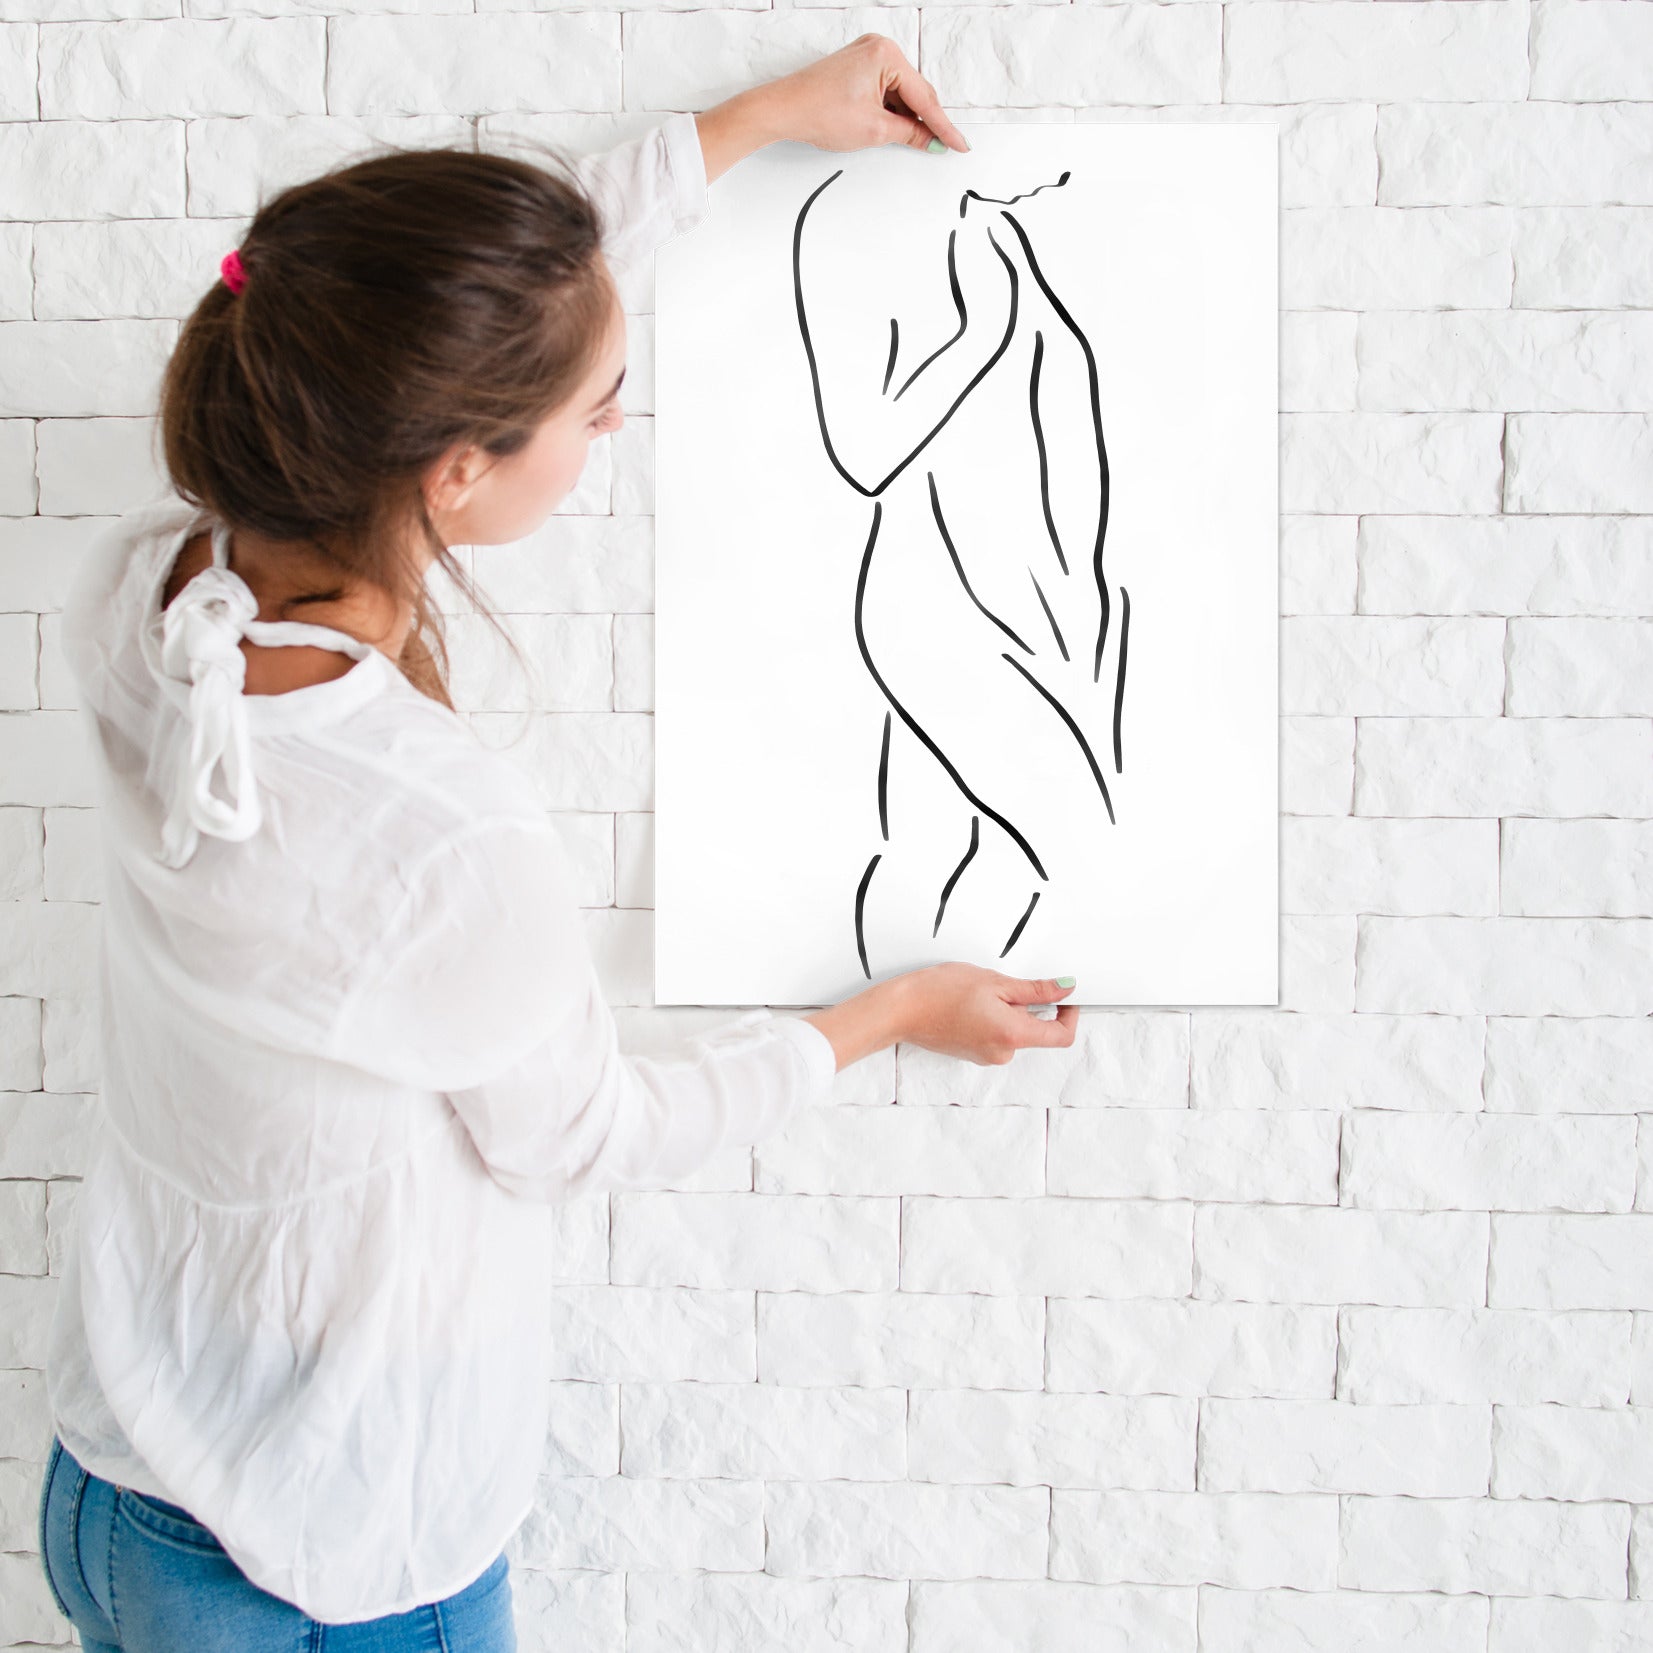 Nude Woman Line Art 002 by Thomas Succes - Canvas, Poster or Framed Print